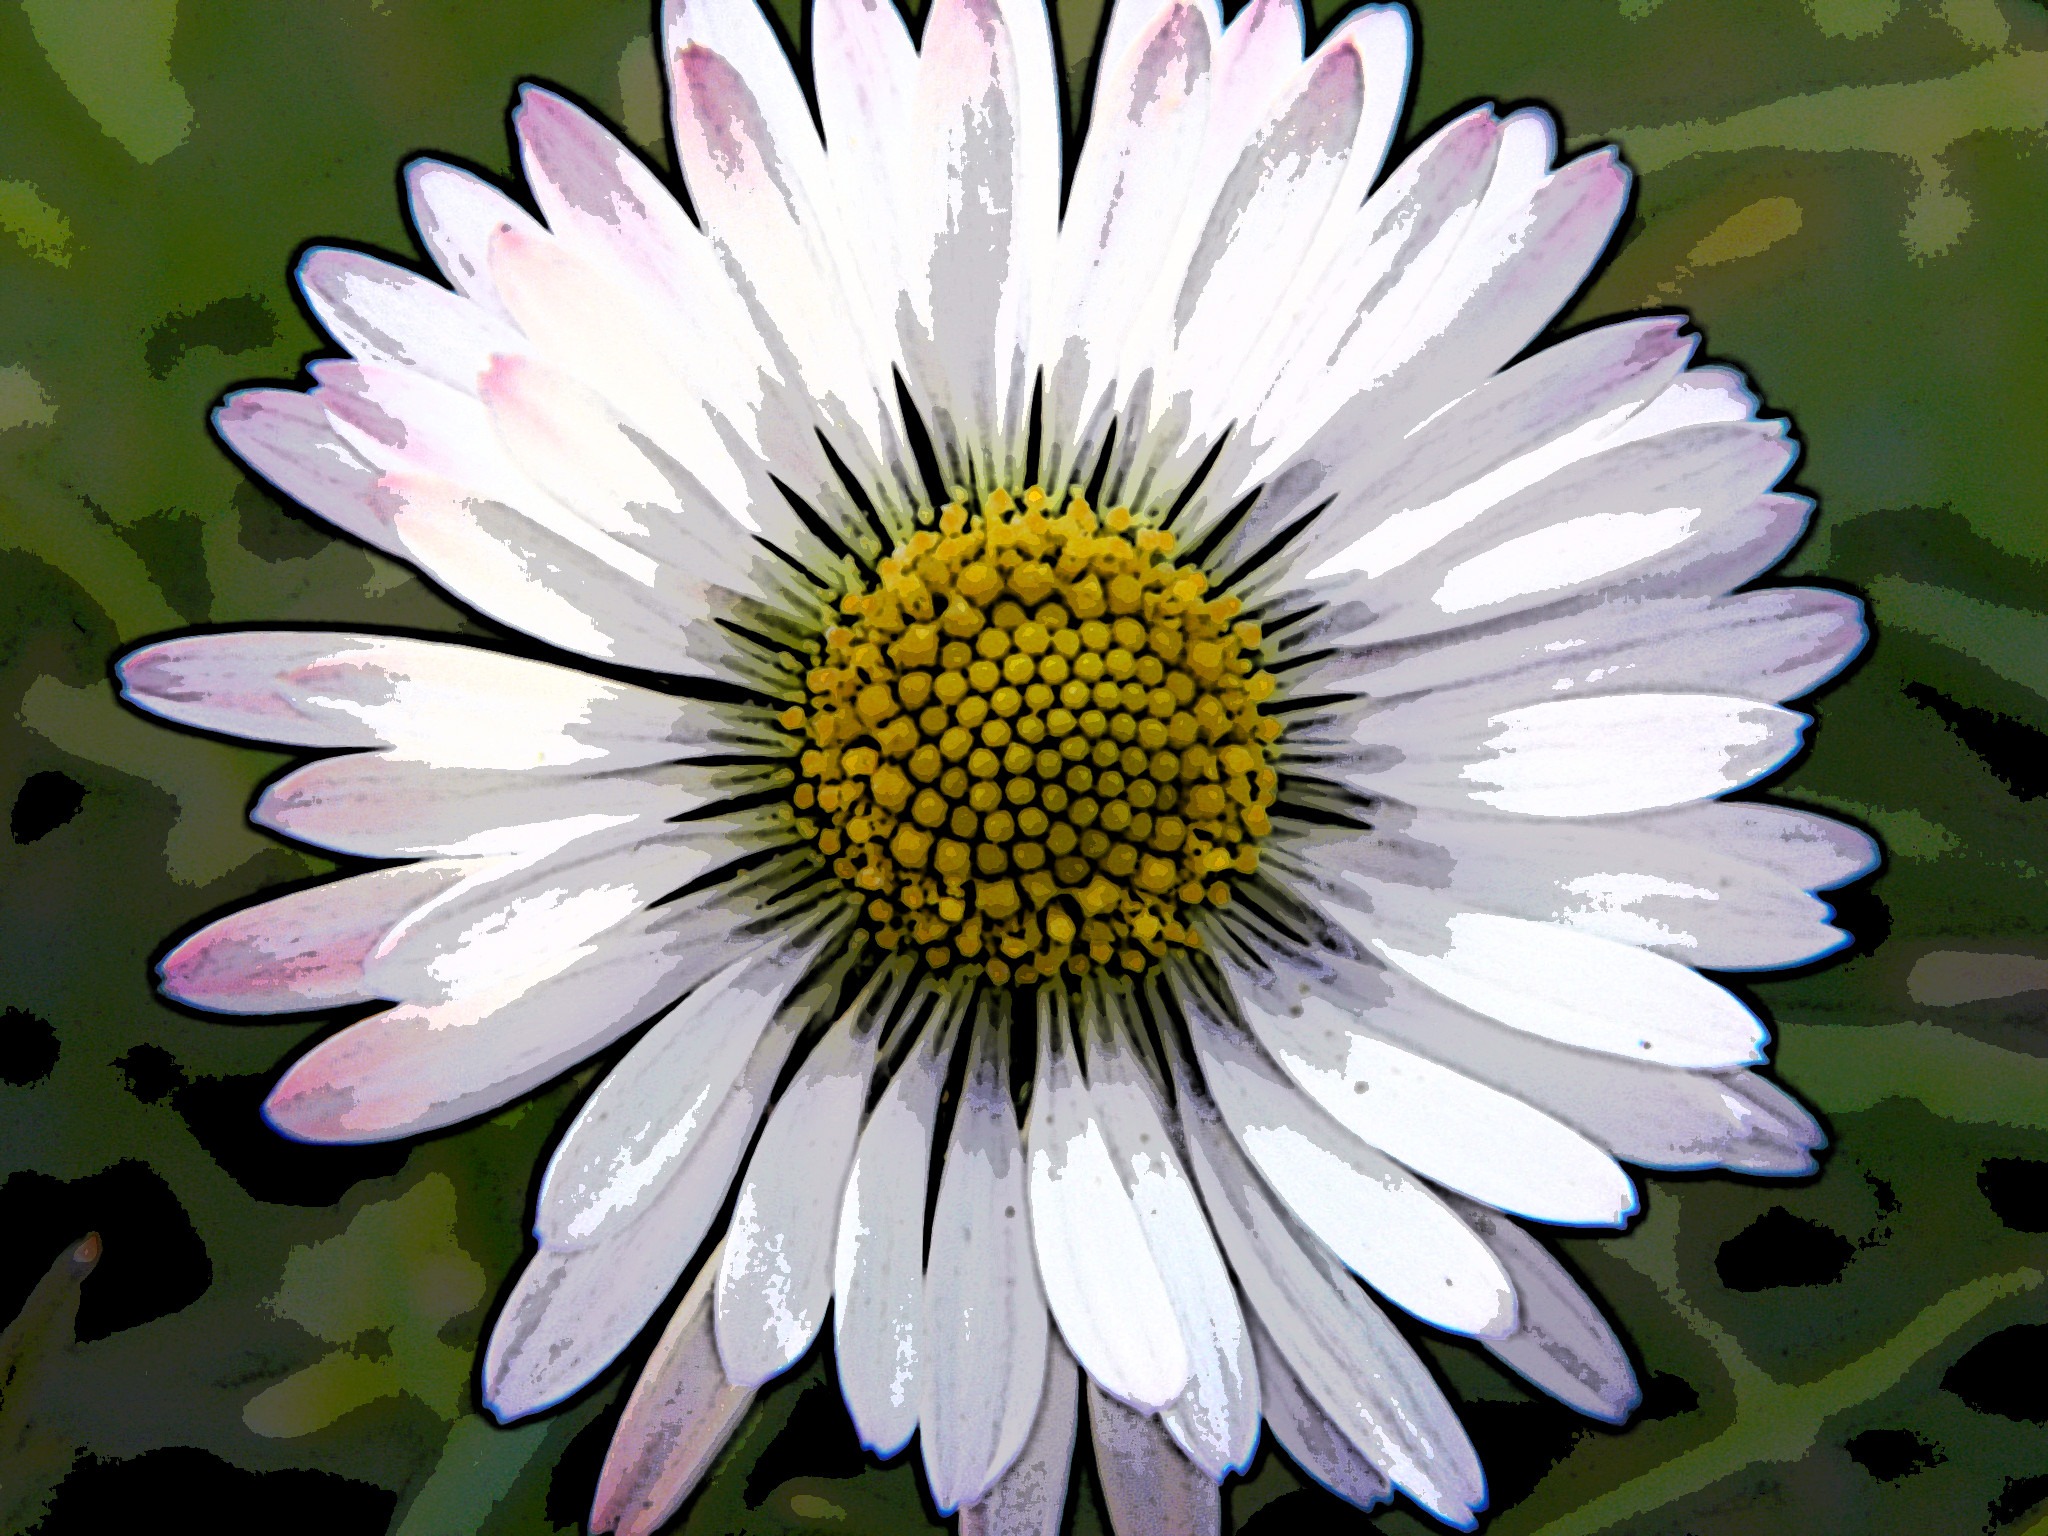 Daisy Flower Inverted Color Digital Effect Free Image Download 1468